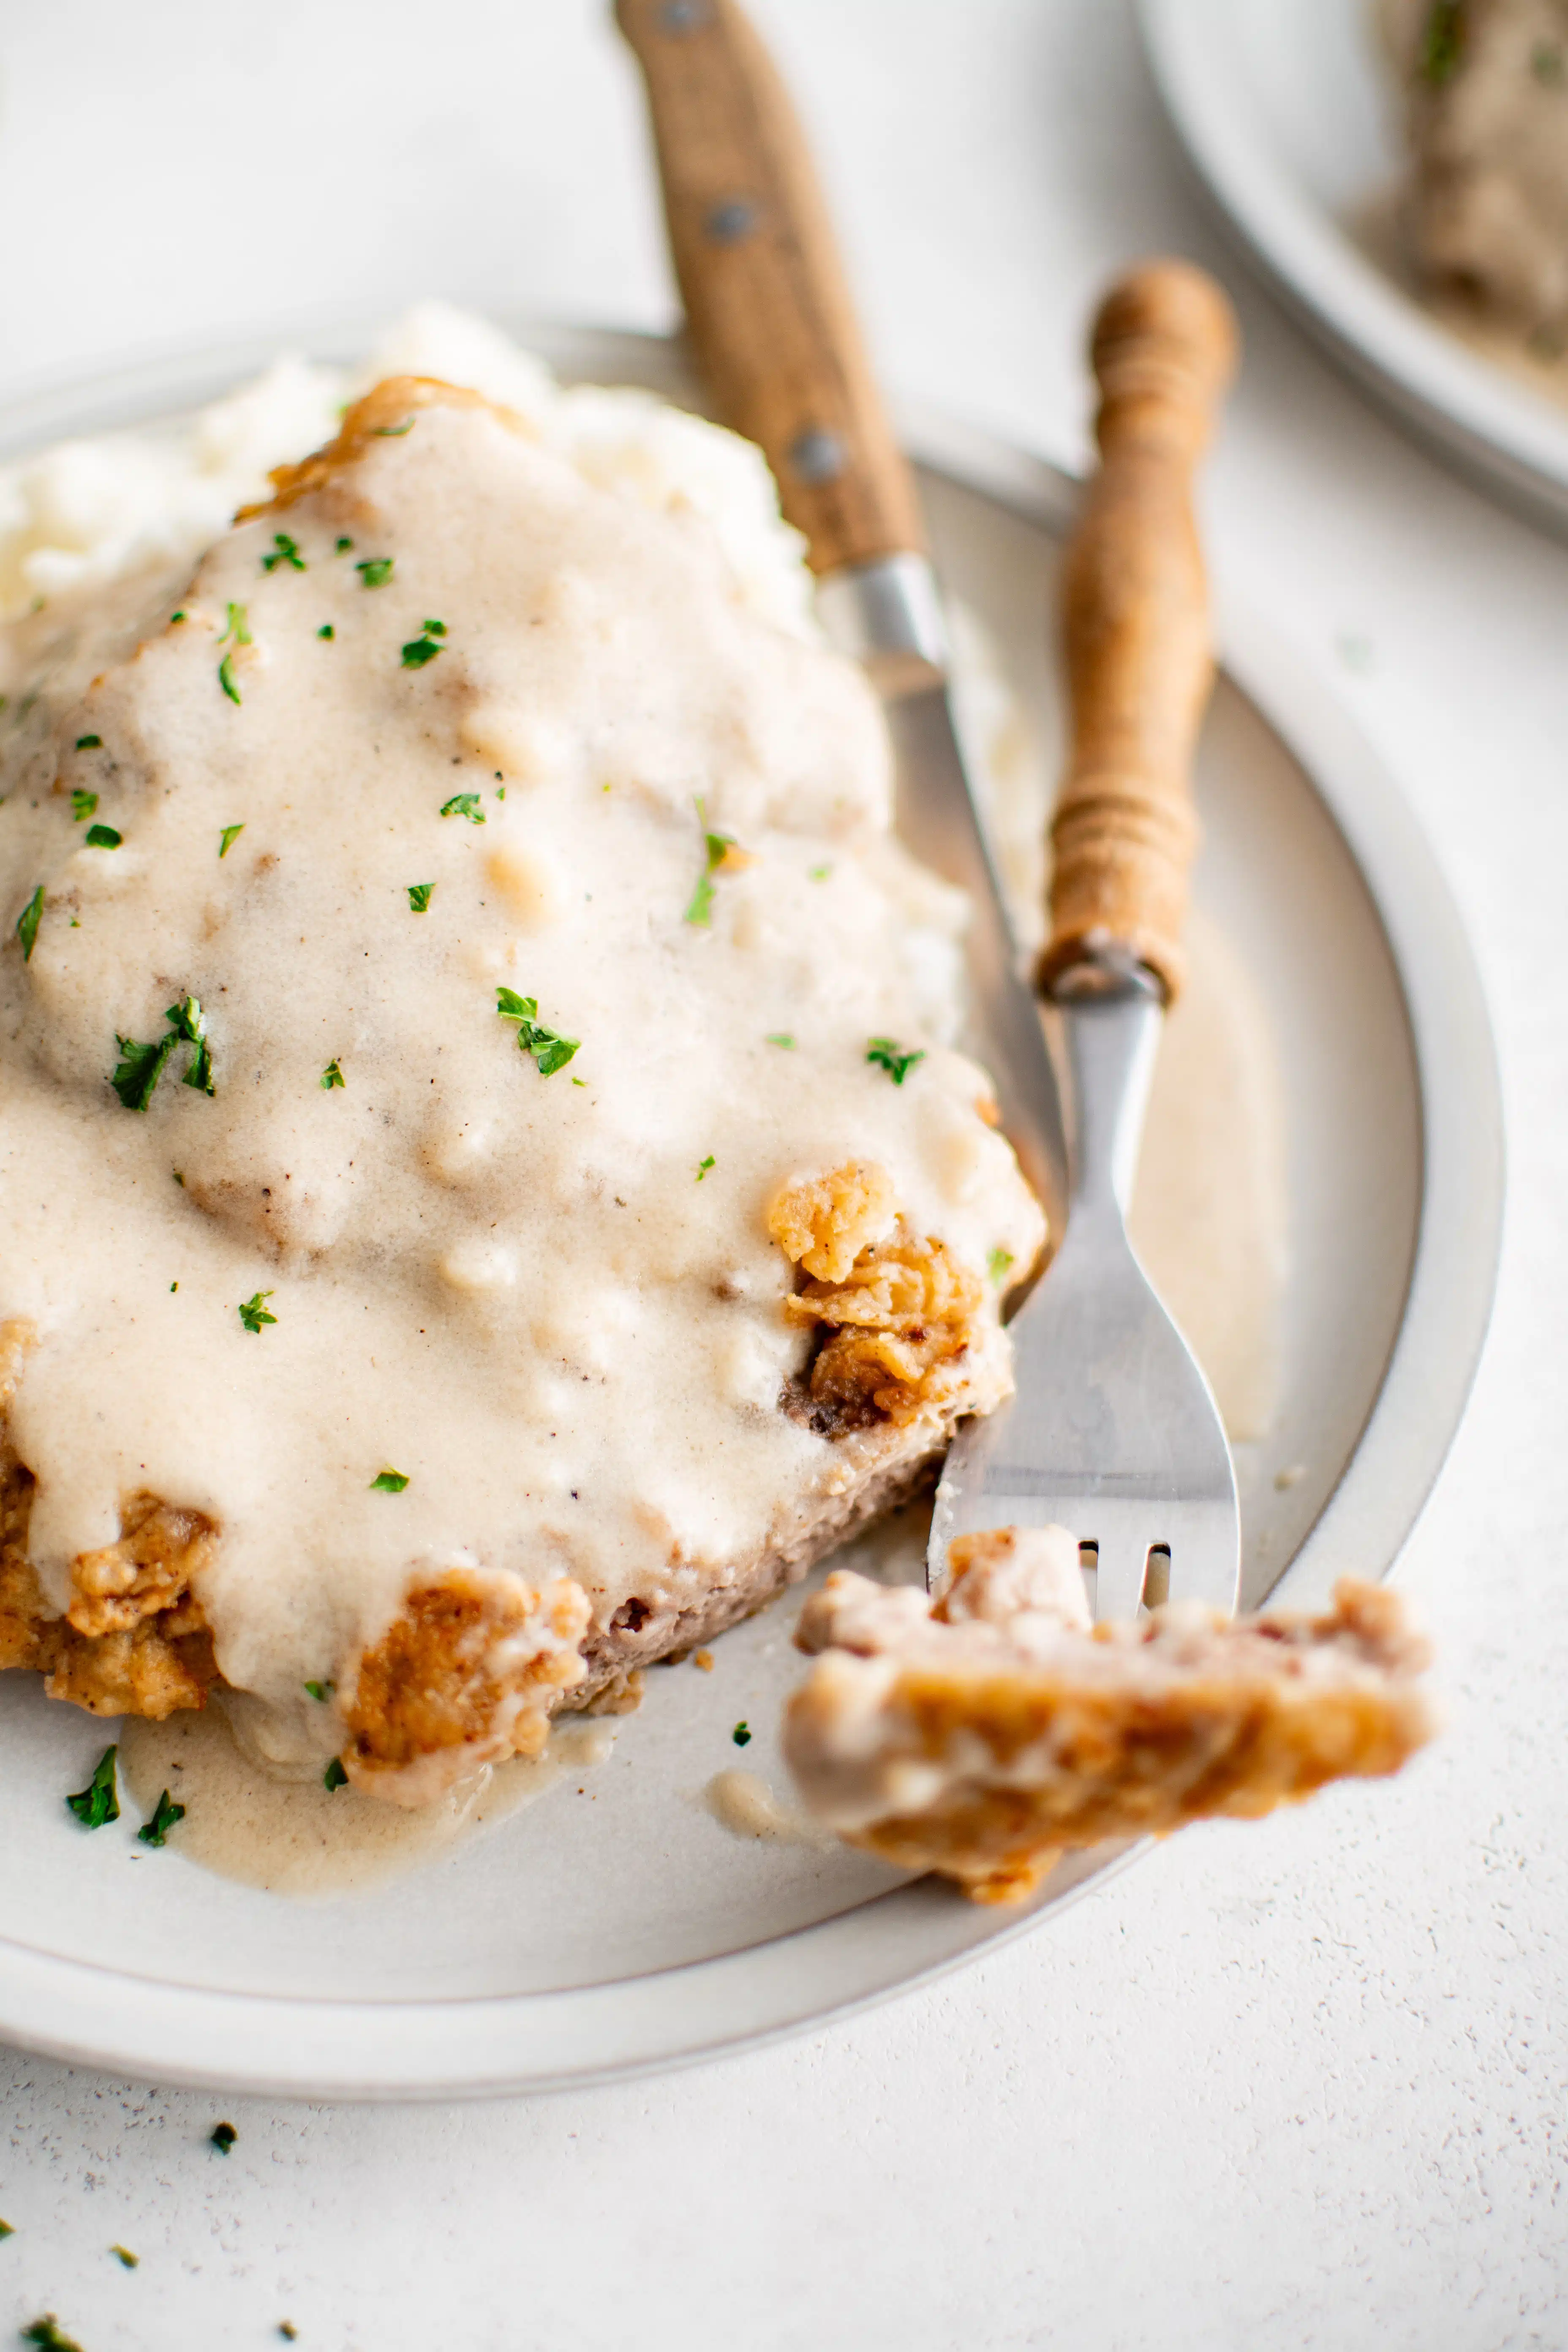 Two pieces of golden brown and crispy chicken fried steak smothered in creamy white gravy and garnished with freshly chopped parsley.